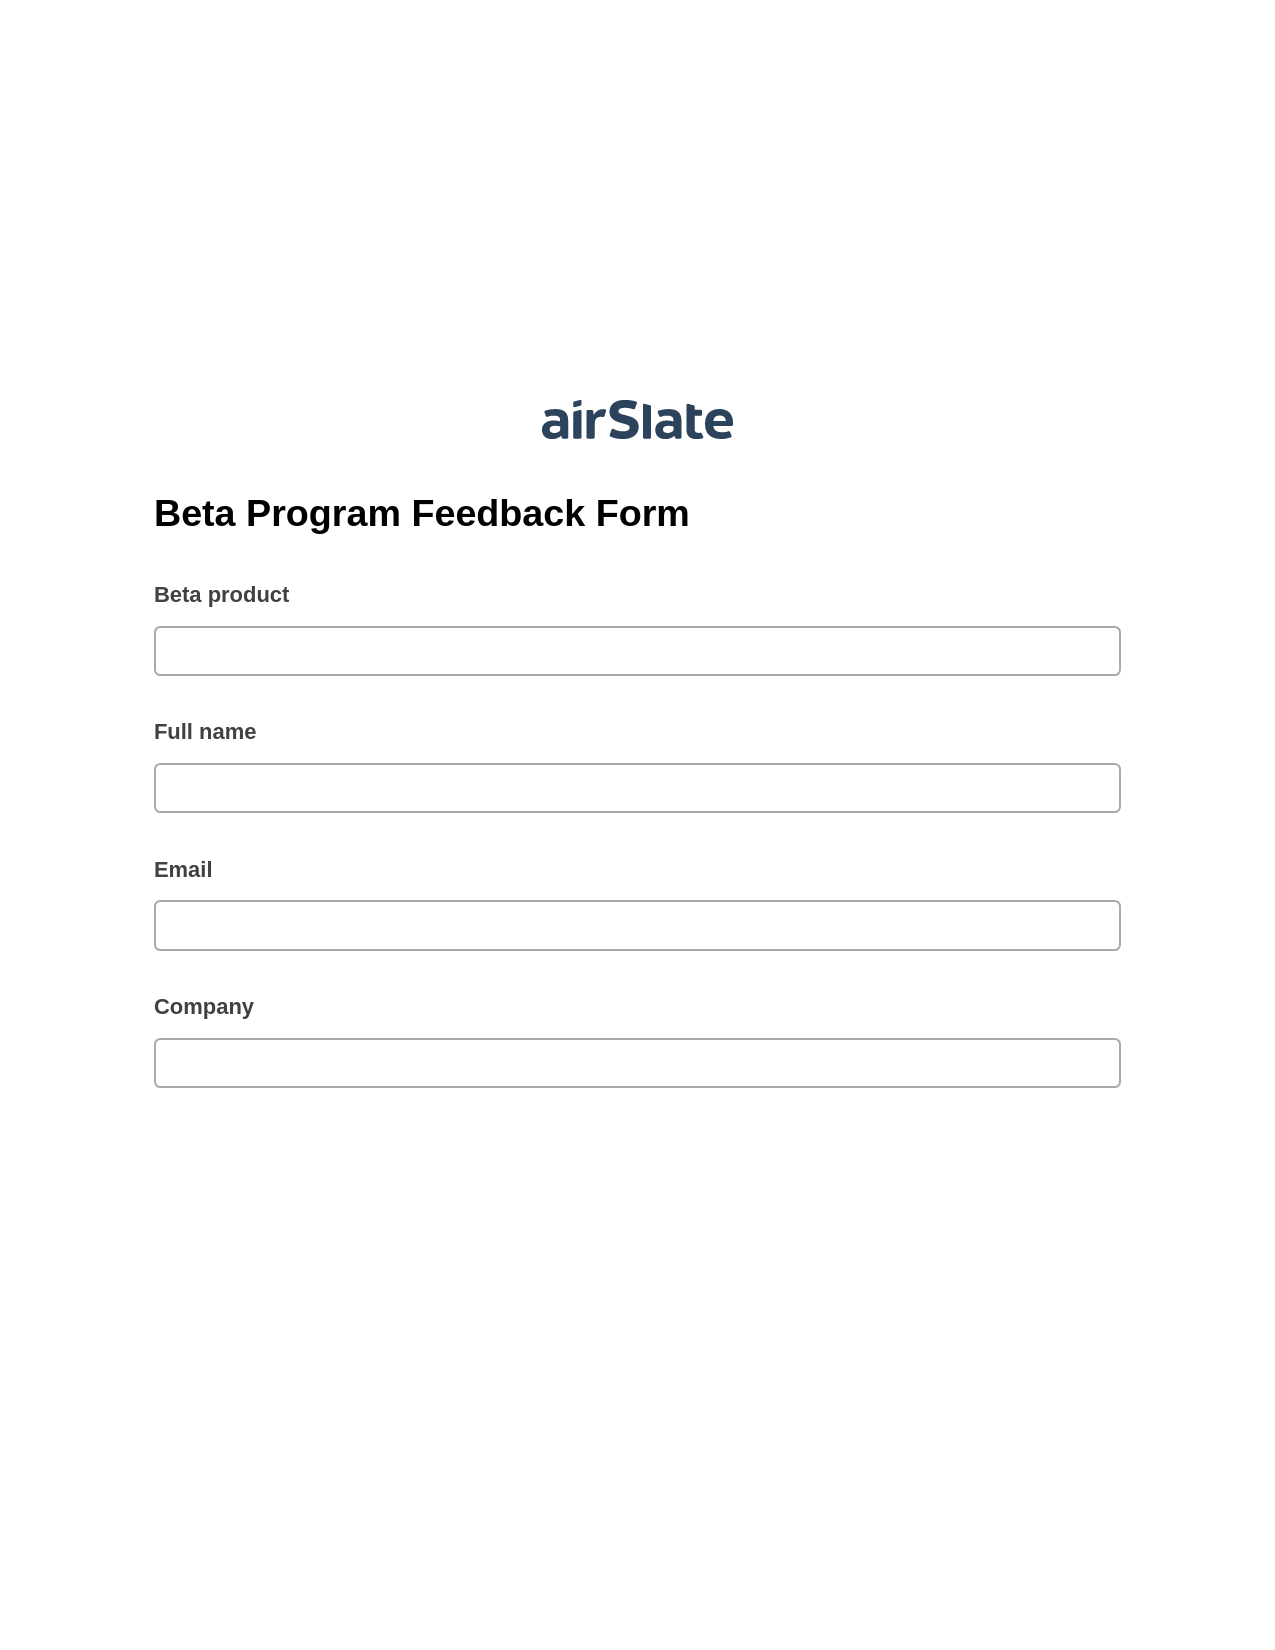 Beta Program Feedback Form Pre-fill Slate from MS Dynamics 365 Records Bot, Mailchimp add recipient to audience Bot, Export to Google Sheet Bot